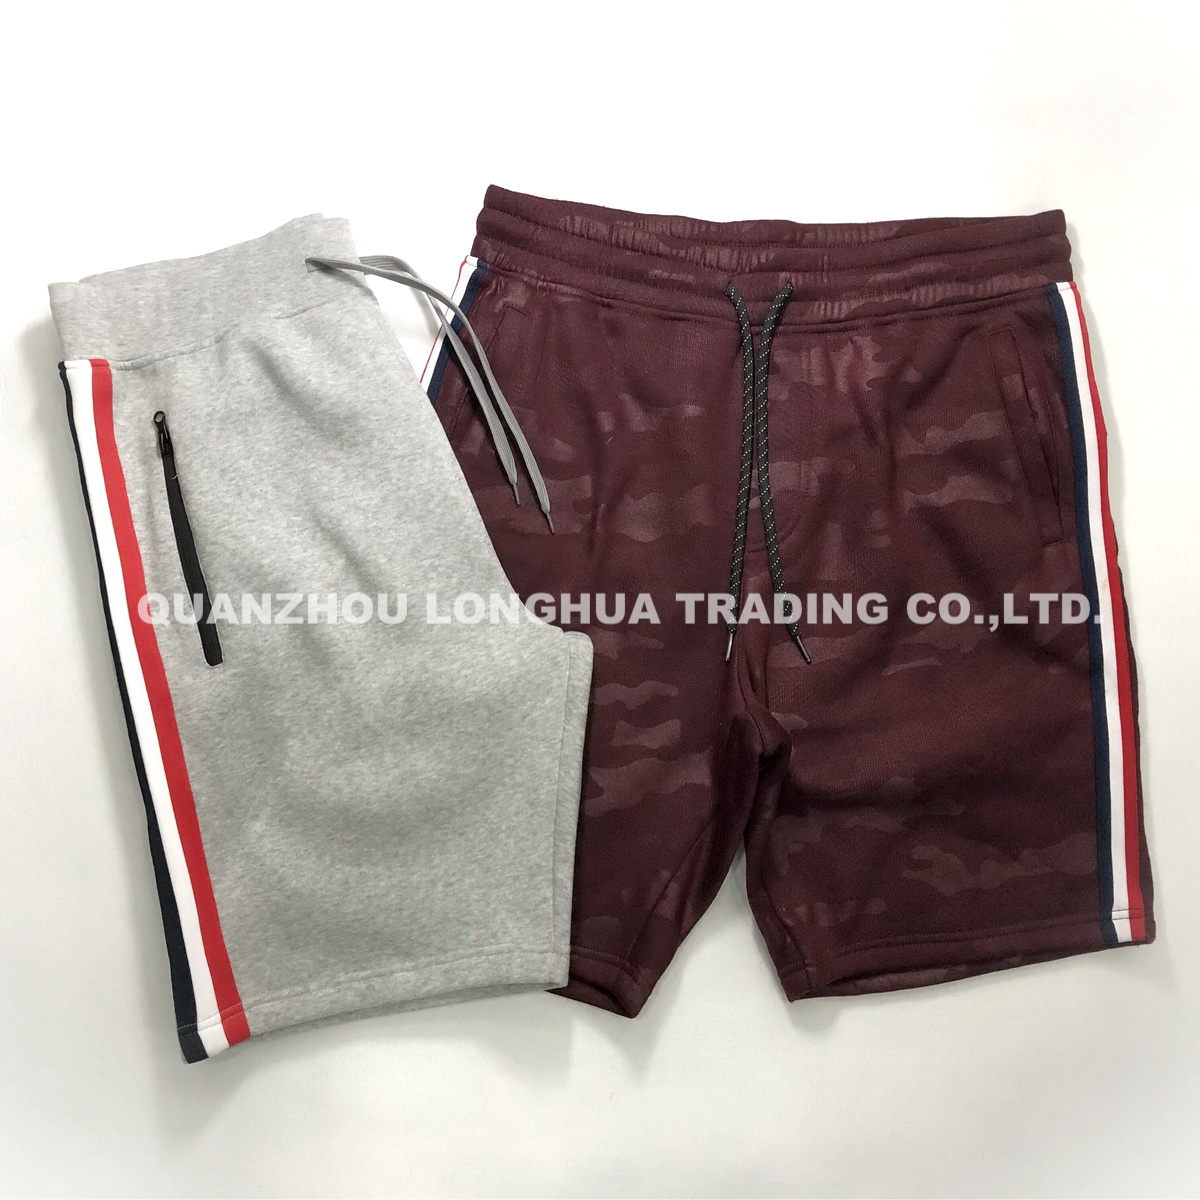  Men and Boys Shorts With Apparel Trousers Jeans Kids Wear Casual Pants Knitwear Polyester Fleece Tape